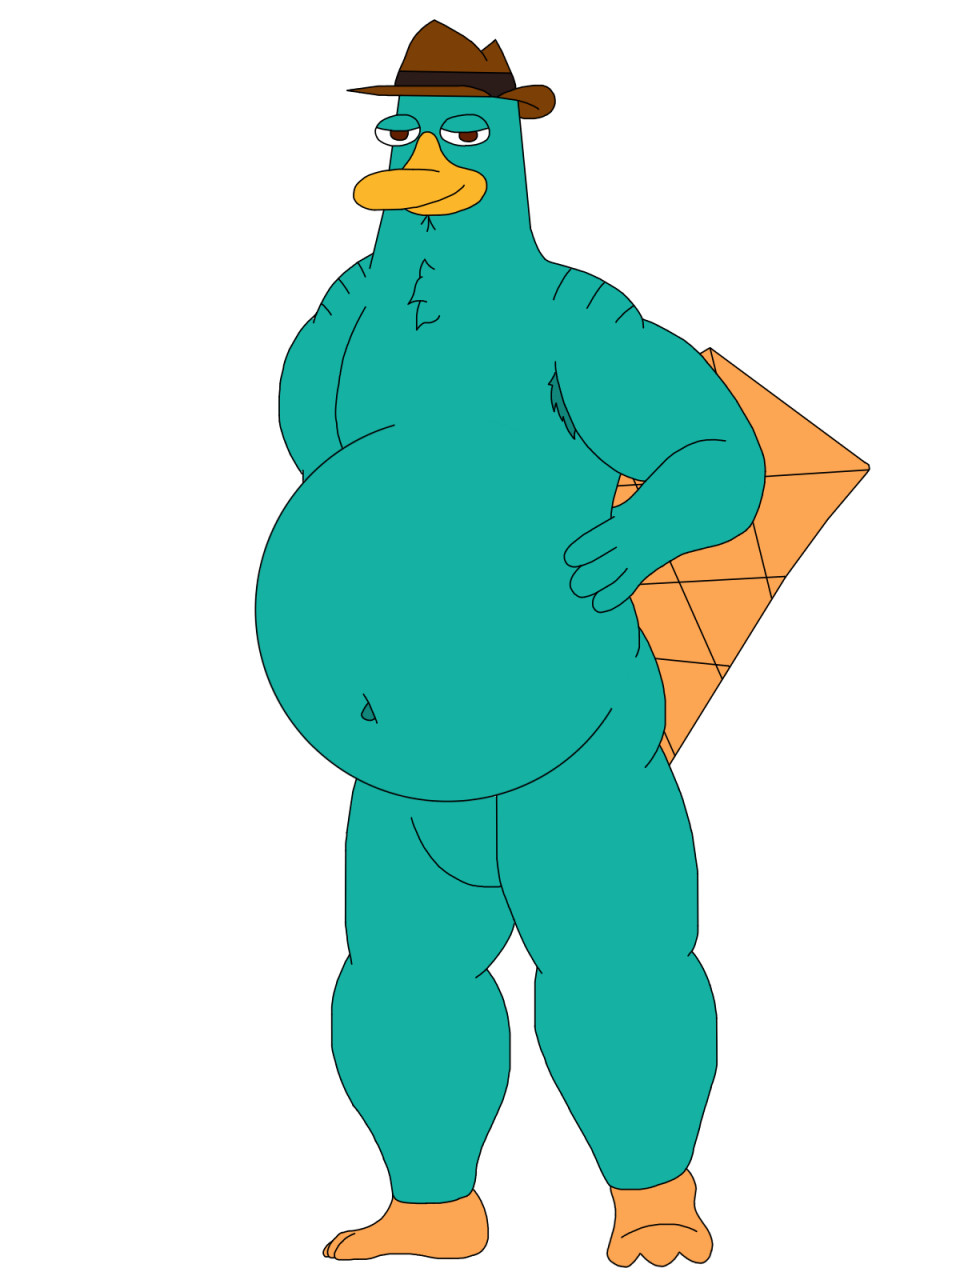 Fat perry the platypus